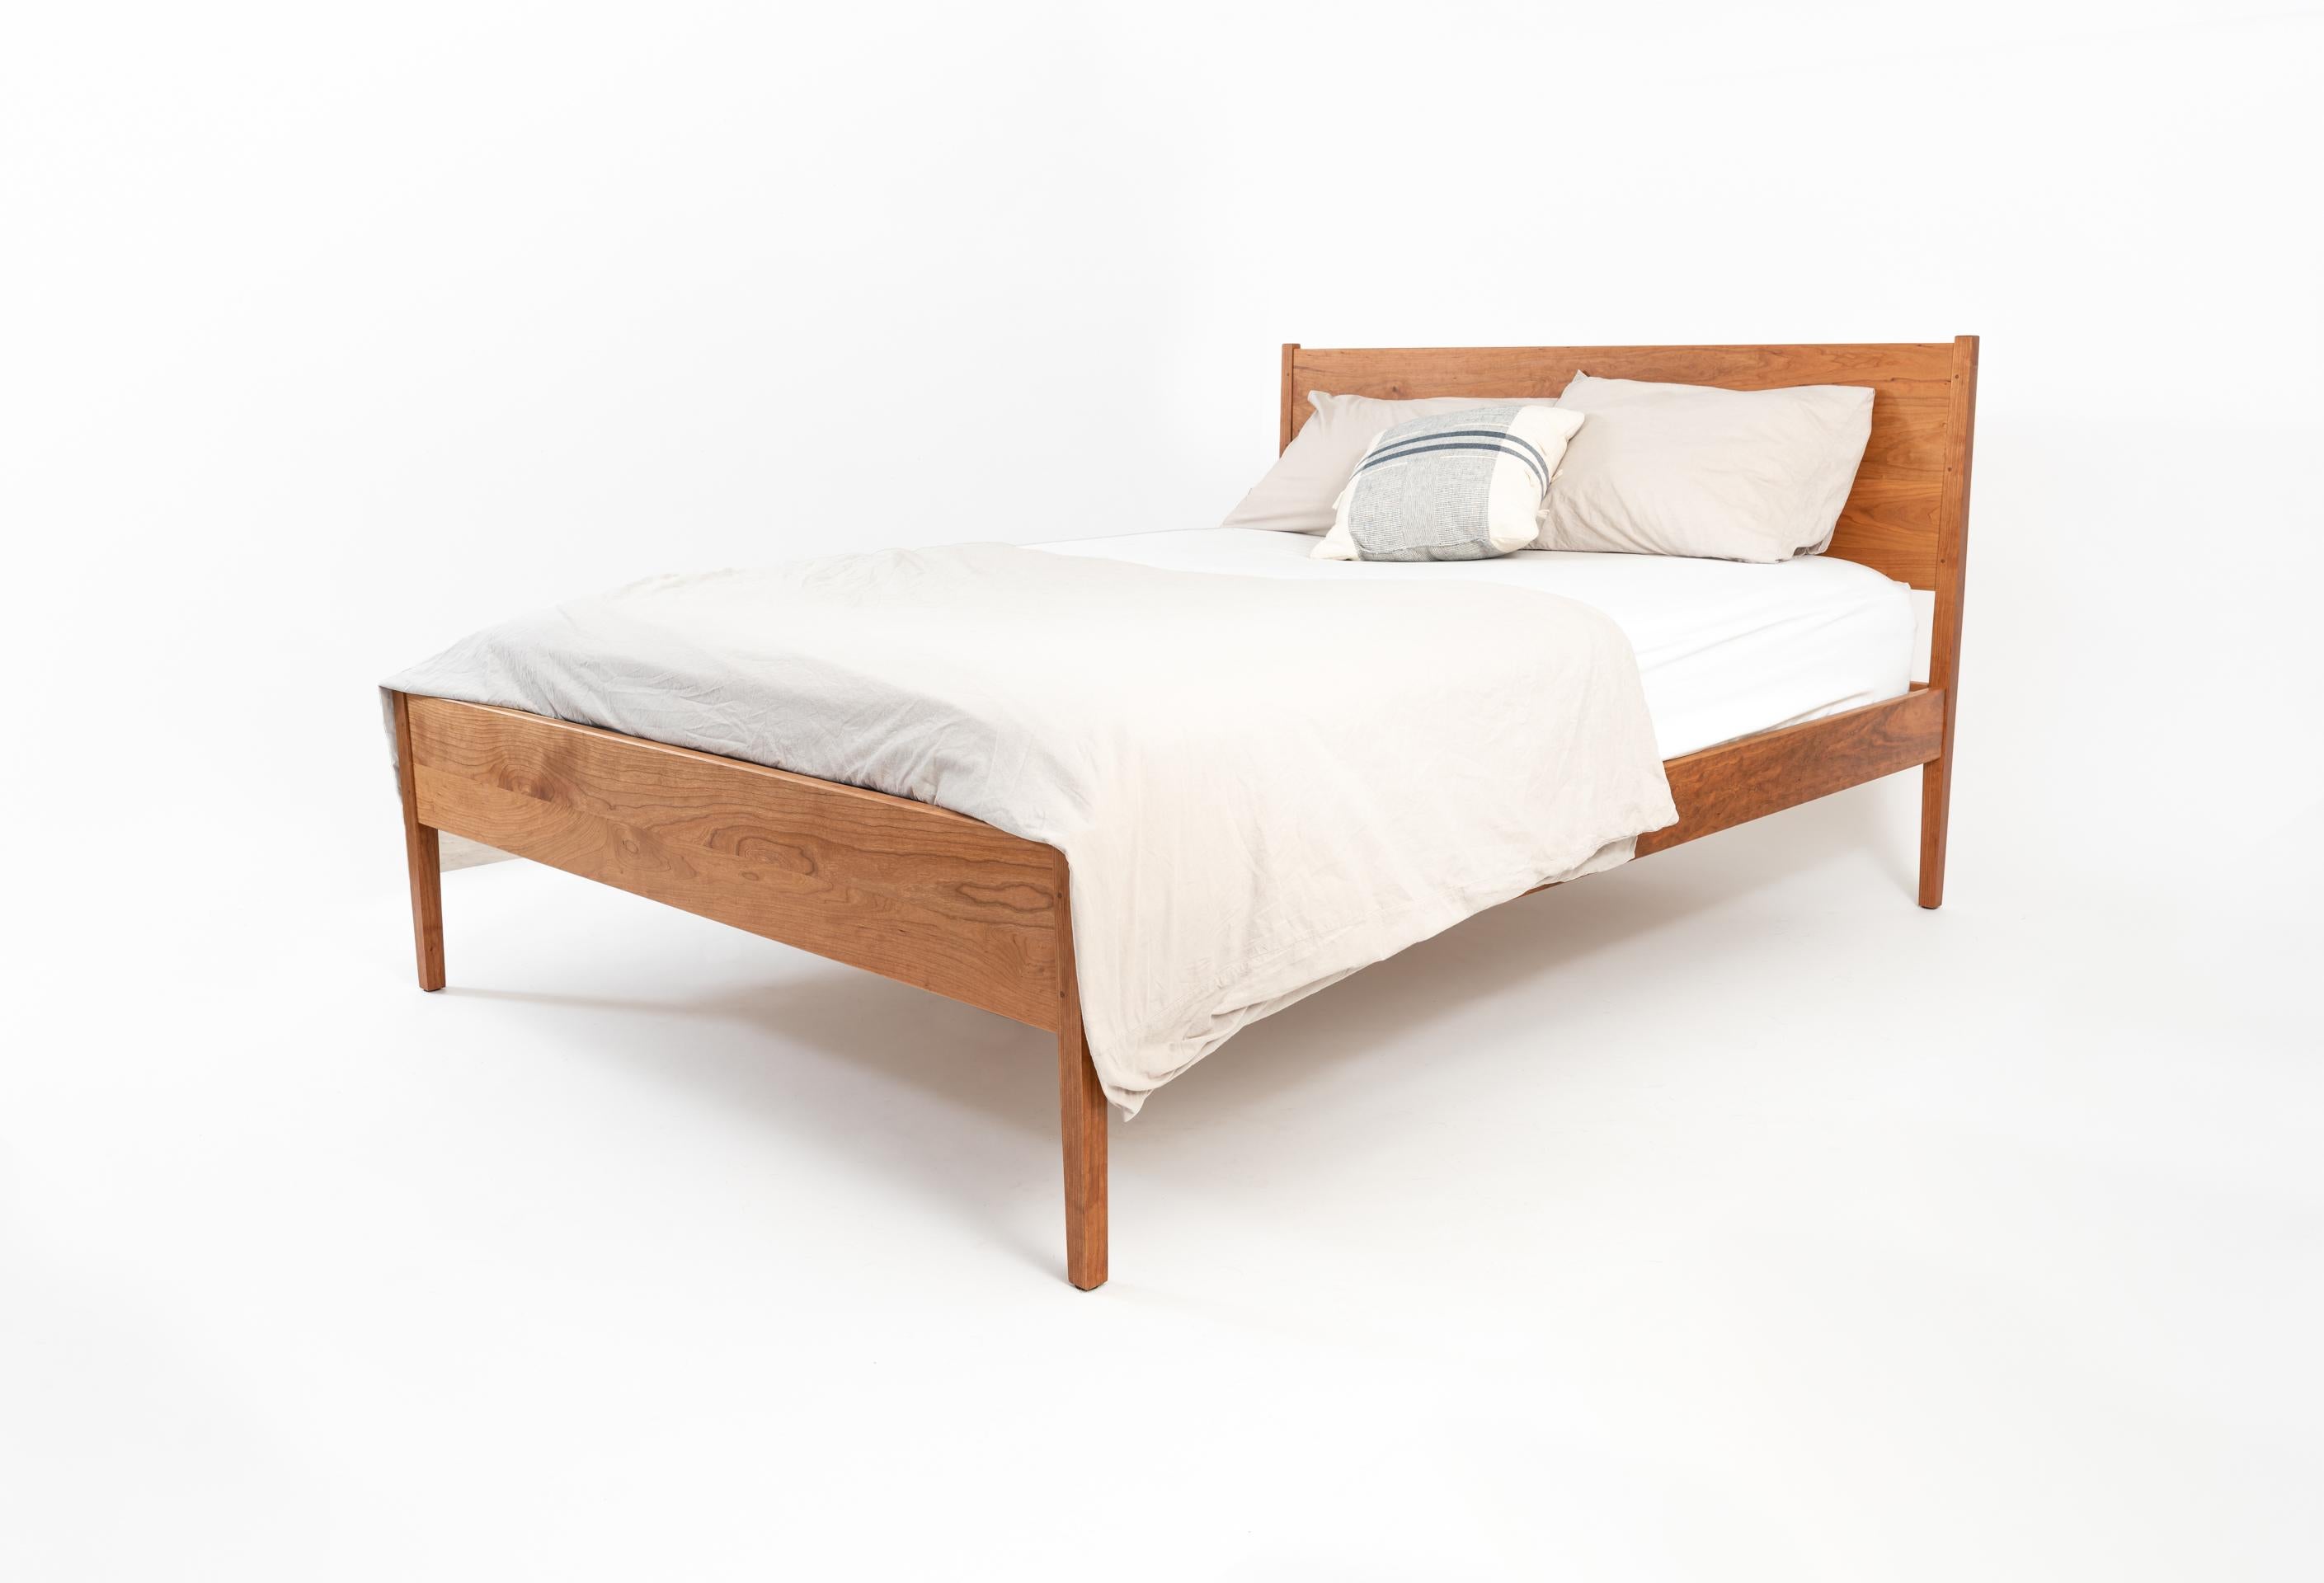 The Wright Bed flirts the line between minimalism and sturdy construction. Named for Lucy Wright, and constructed from North American Cherry, this bed is our tribute to the lean simplicity and ascetic of the original shakers.

Sized to fit a